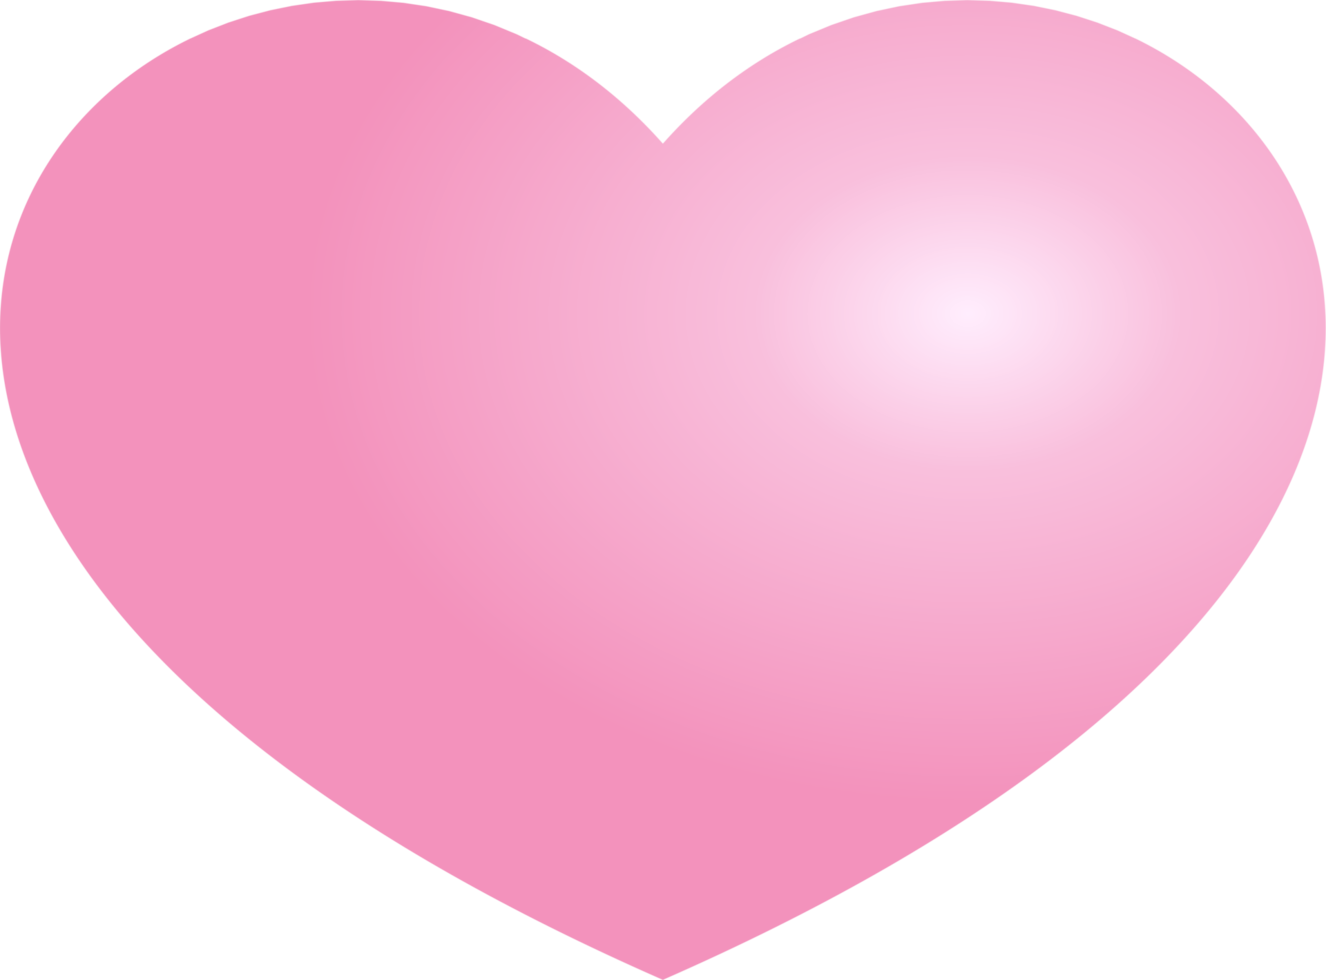 The heart pink love icon PNG